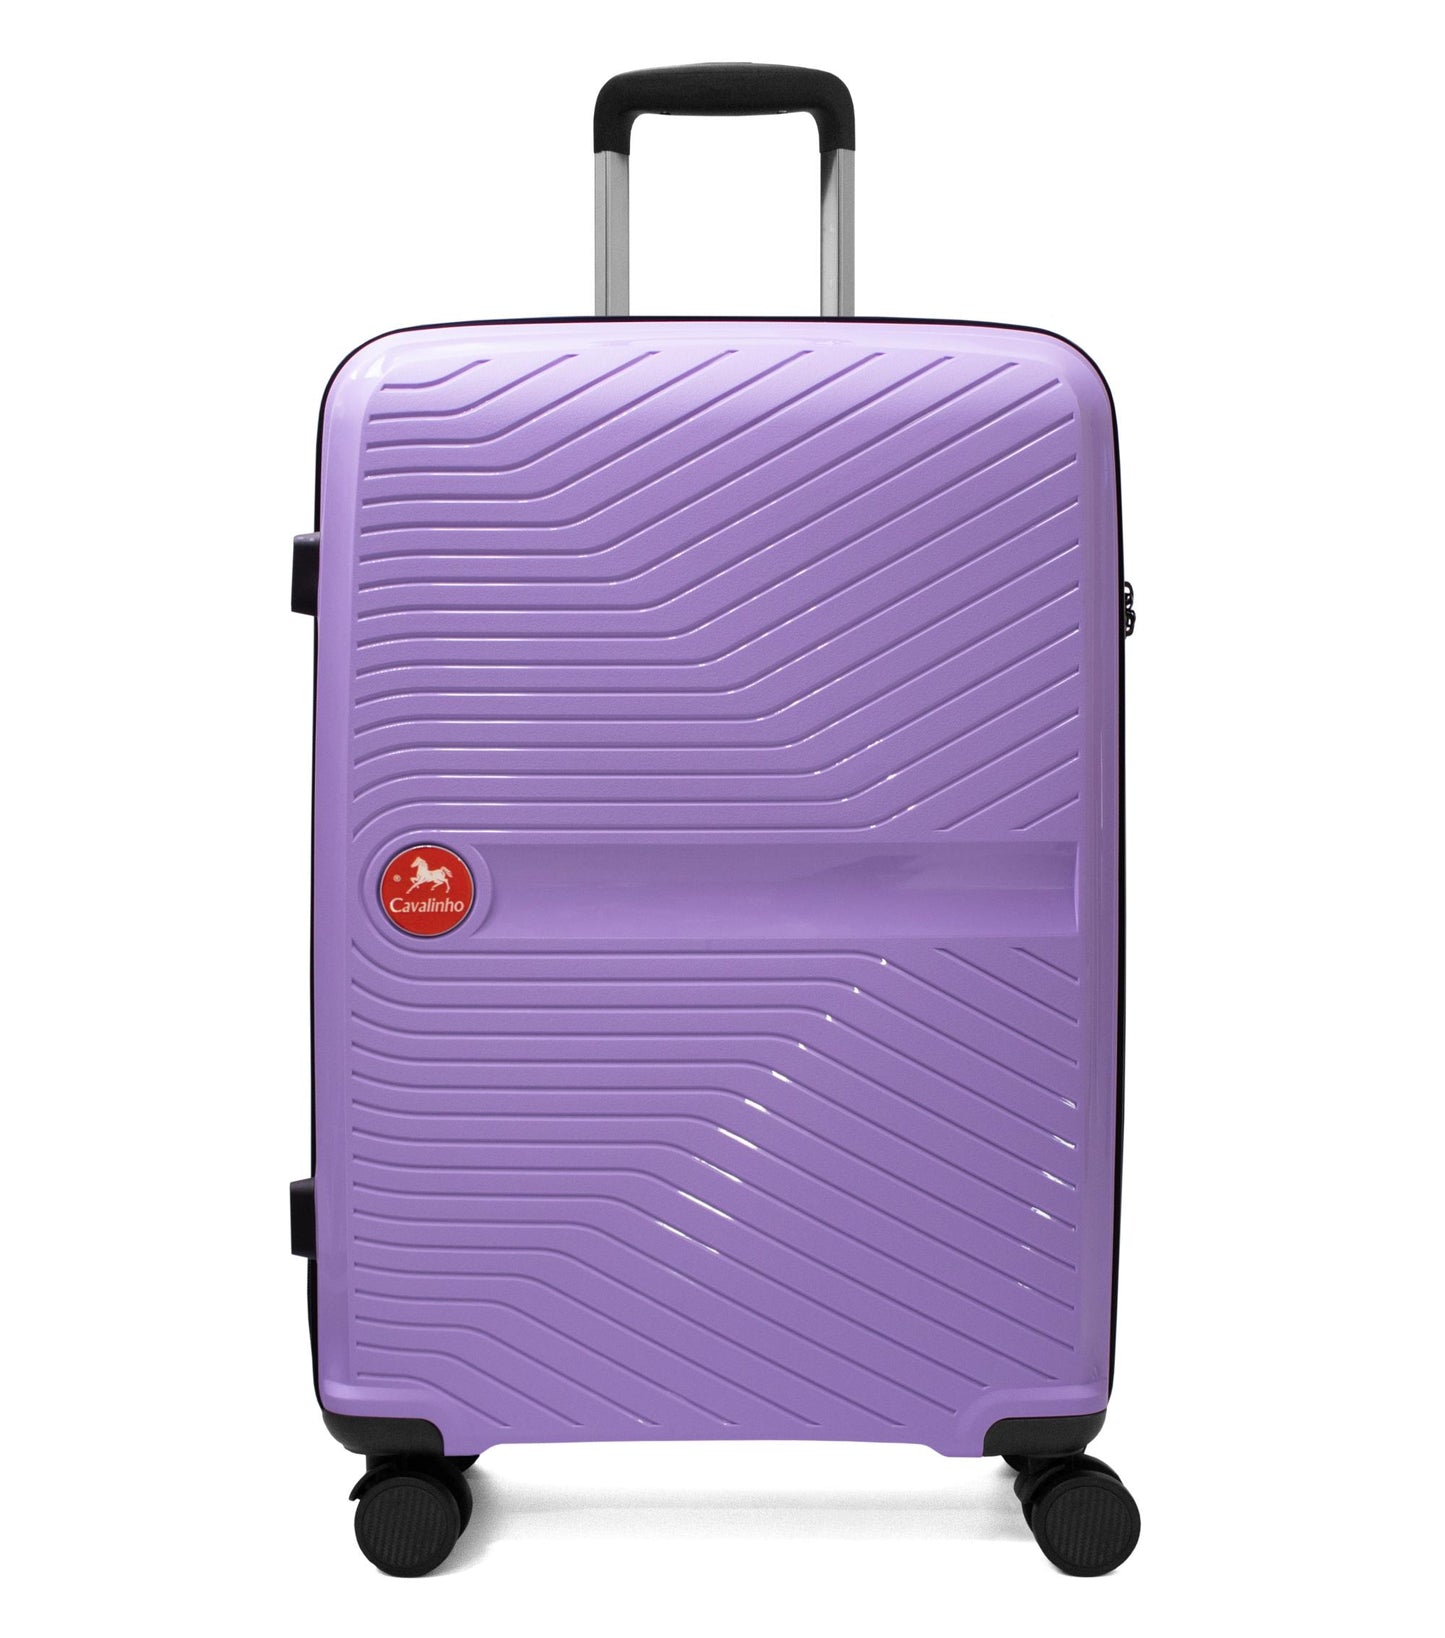 Cavalinho Colorful Check-in Hardside Luggage (24") - 24 inch Lilac - 68020004.39.24_1